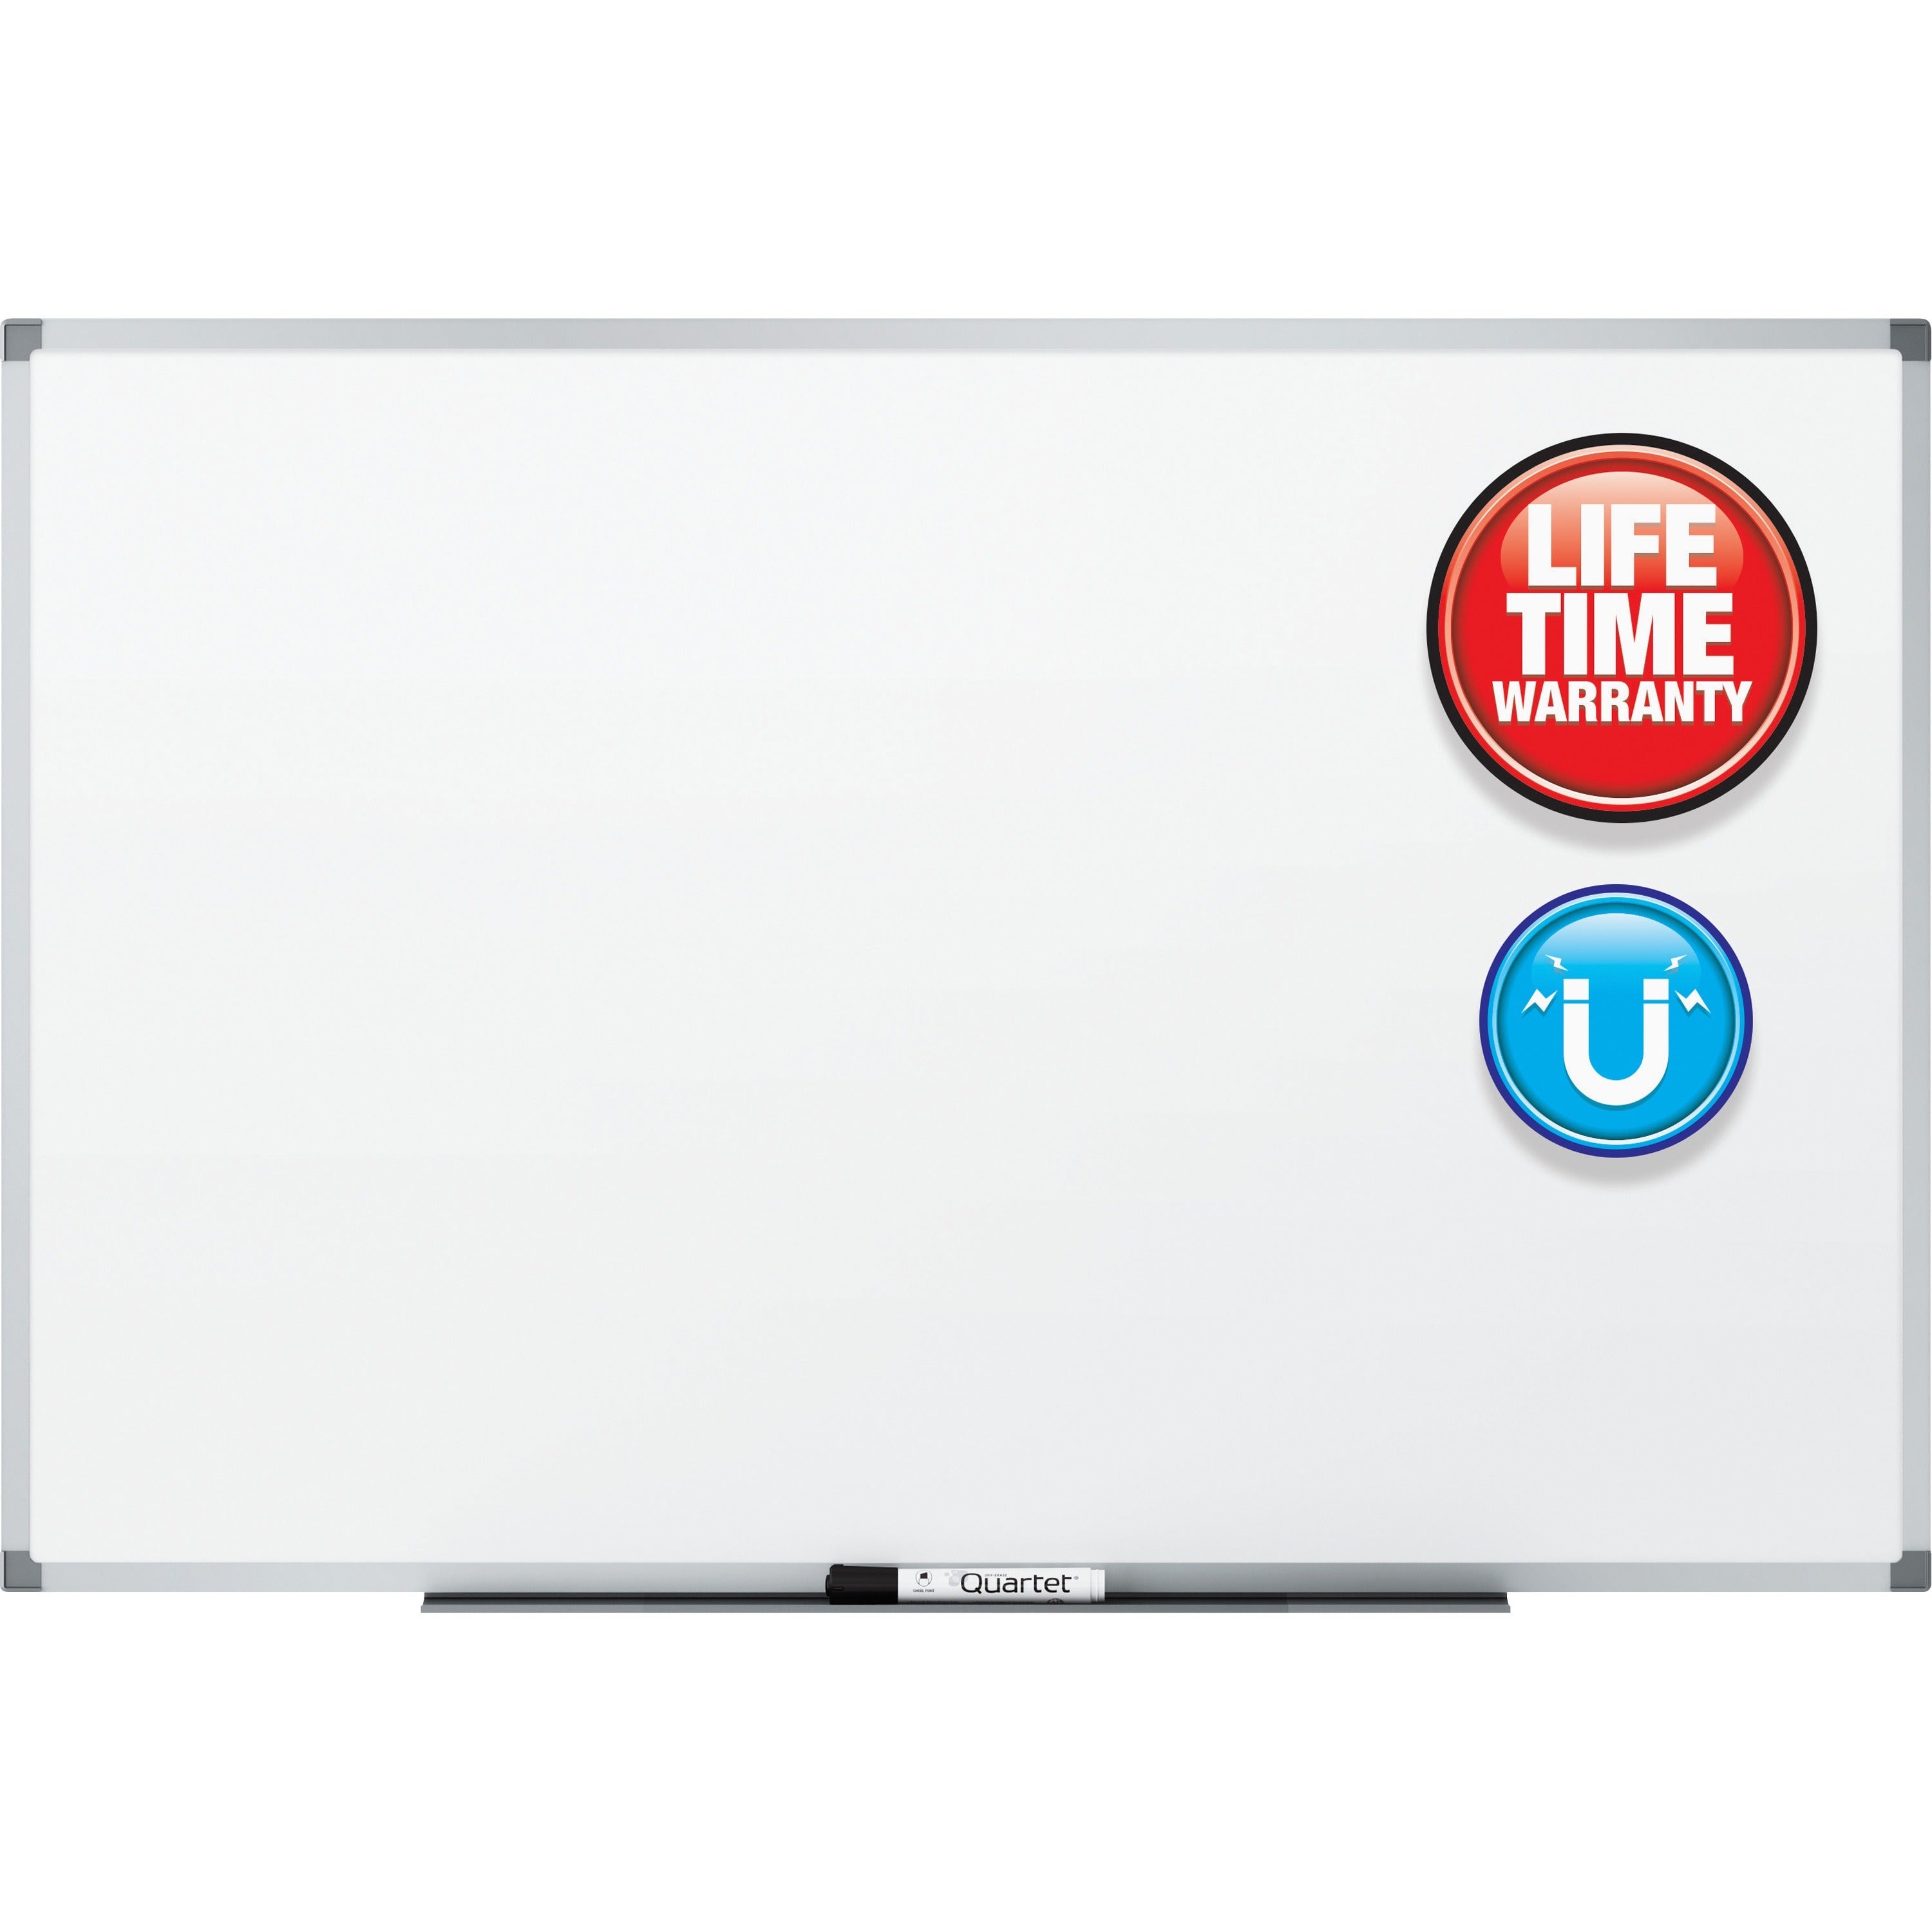 quartet-standard-duramax-magnetic-whiteboard-72-6-ft-width-x-48-4-ft-height-white-porcelain-surface-silver-aluminum-frame-rectangle-horizontal-vertical-magnetic-assembly-required-1-each-taa-compliant_qrt85517 - 1